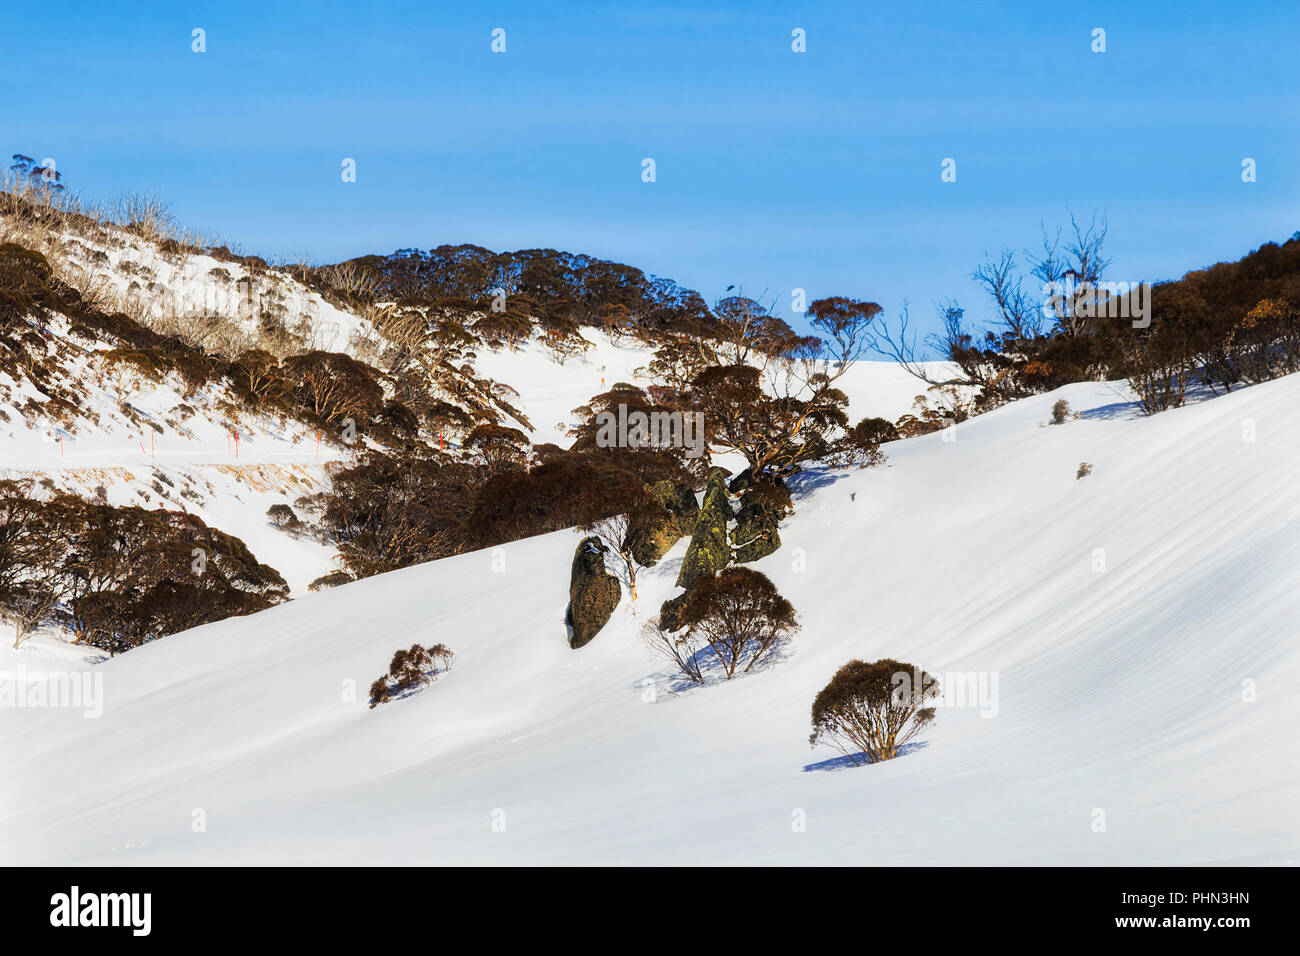 Snow covered slopes of SNowy mountains surrounding Perisher valley during winter season in popular skiing and snowboarding resort, good for cross-coun Stock Photo